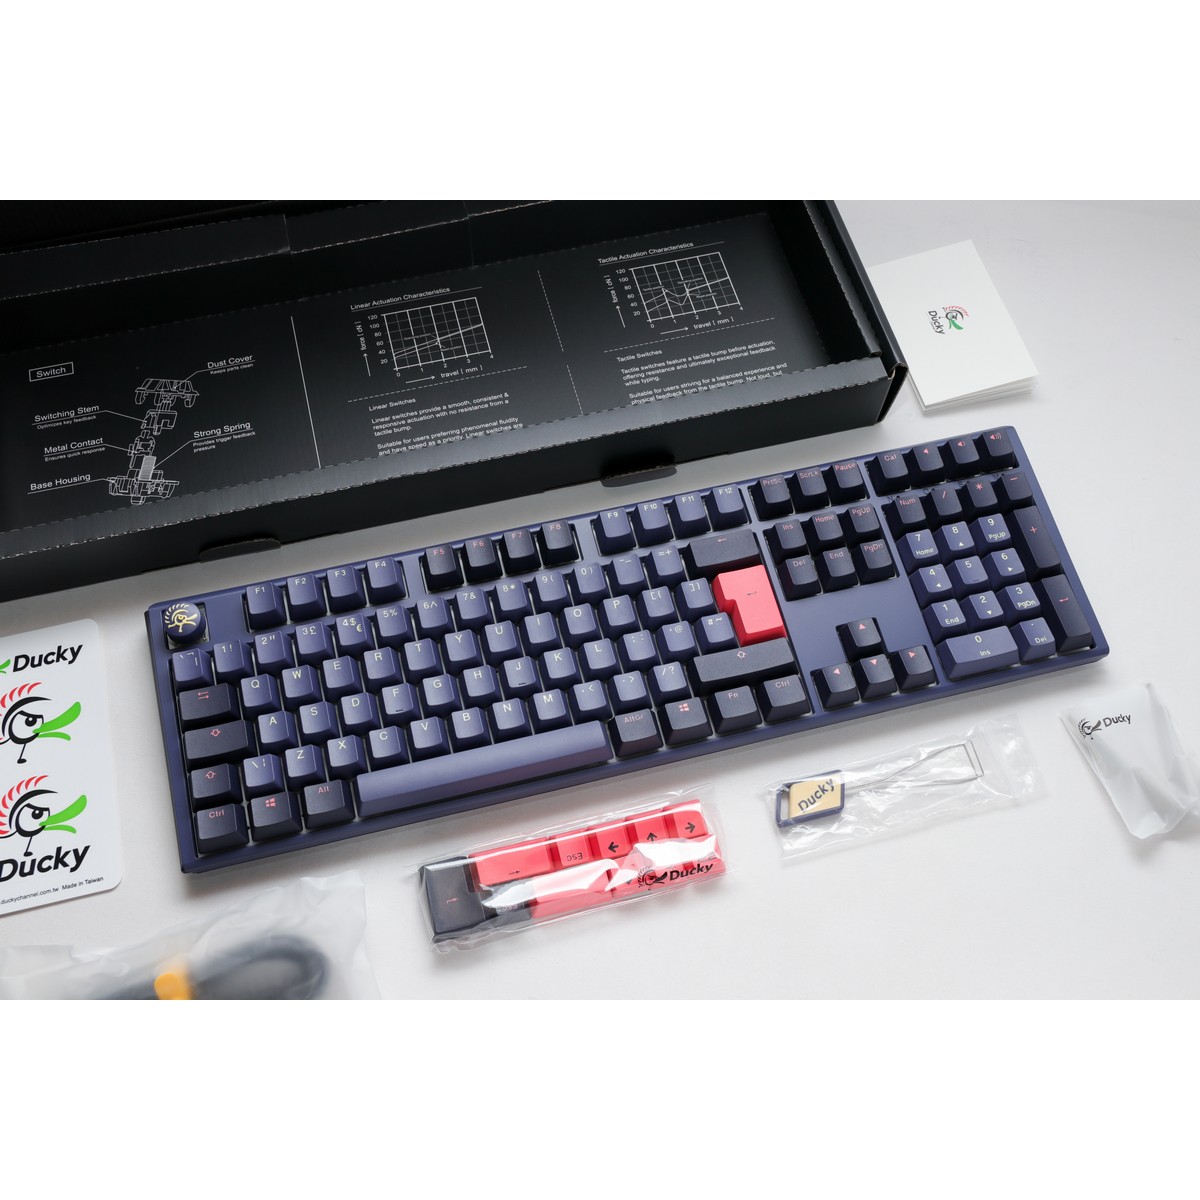 Ducky - Ducky One 3 Cosmic USB RGB Mechanical Gaming Keyboard Cherry MX Speed Silver Switch - UK Layout